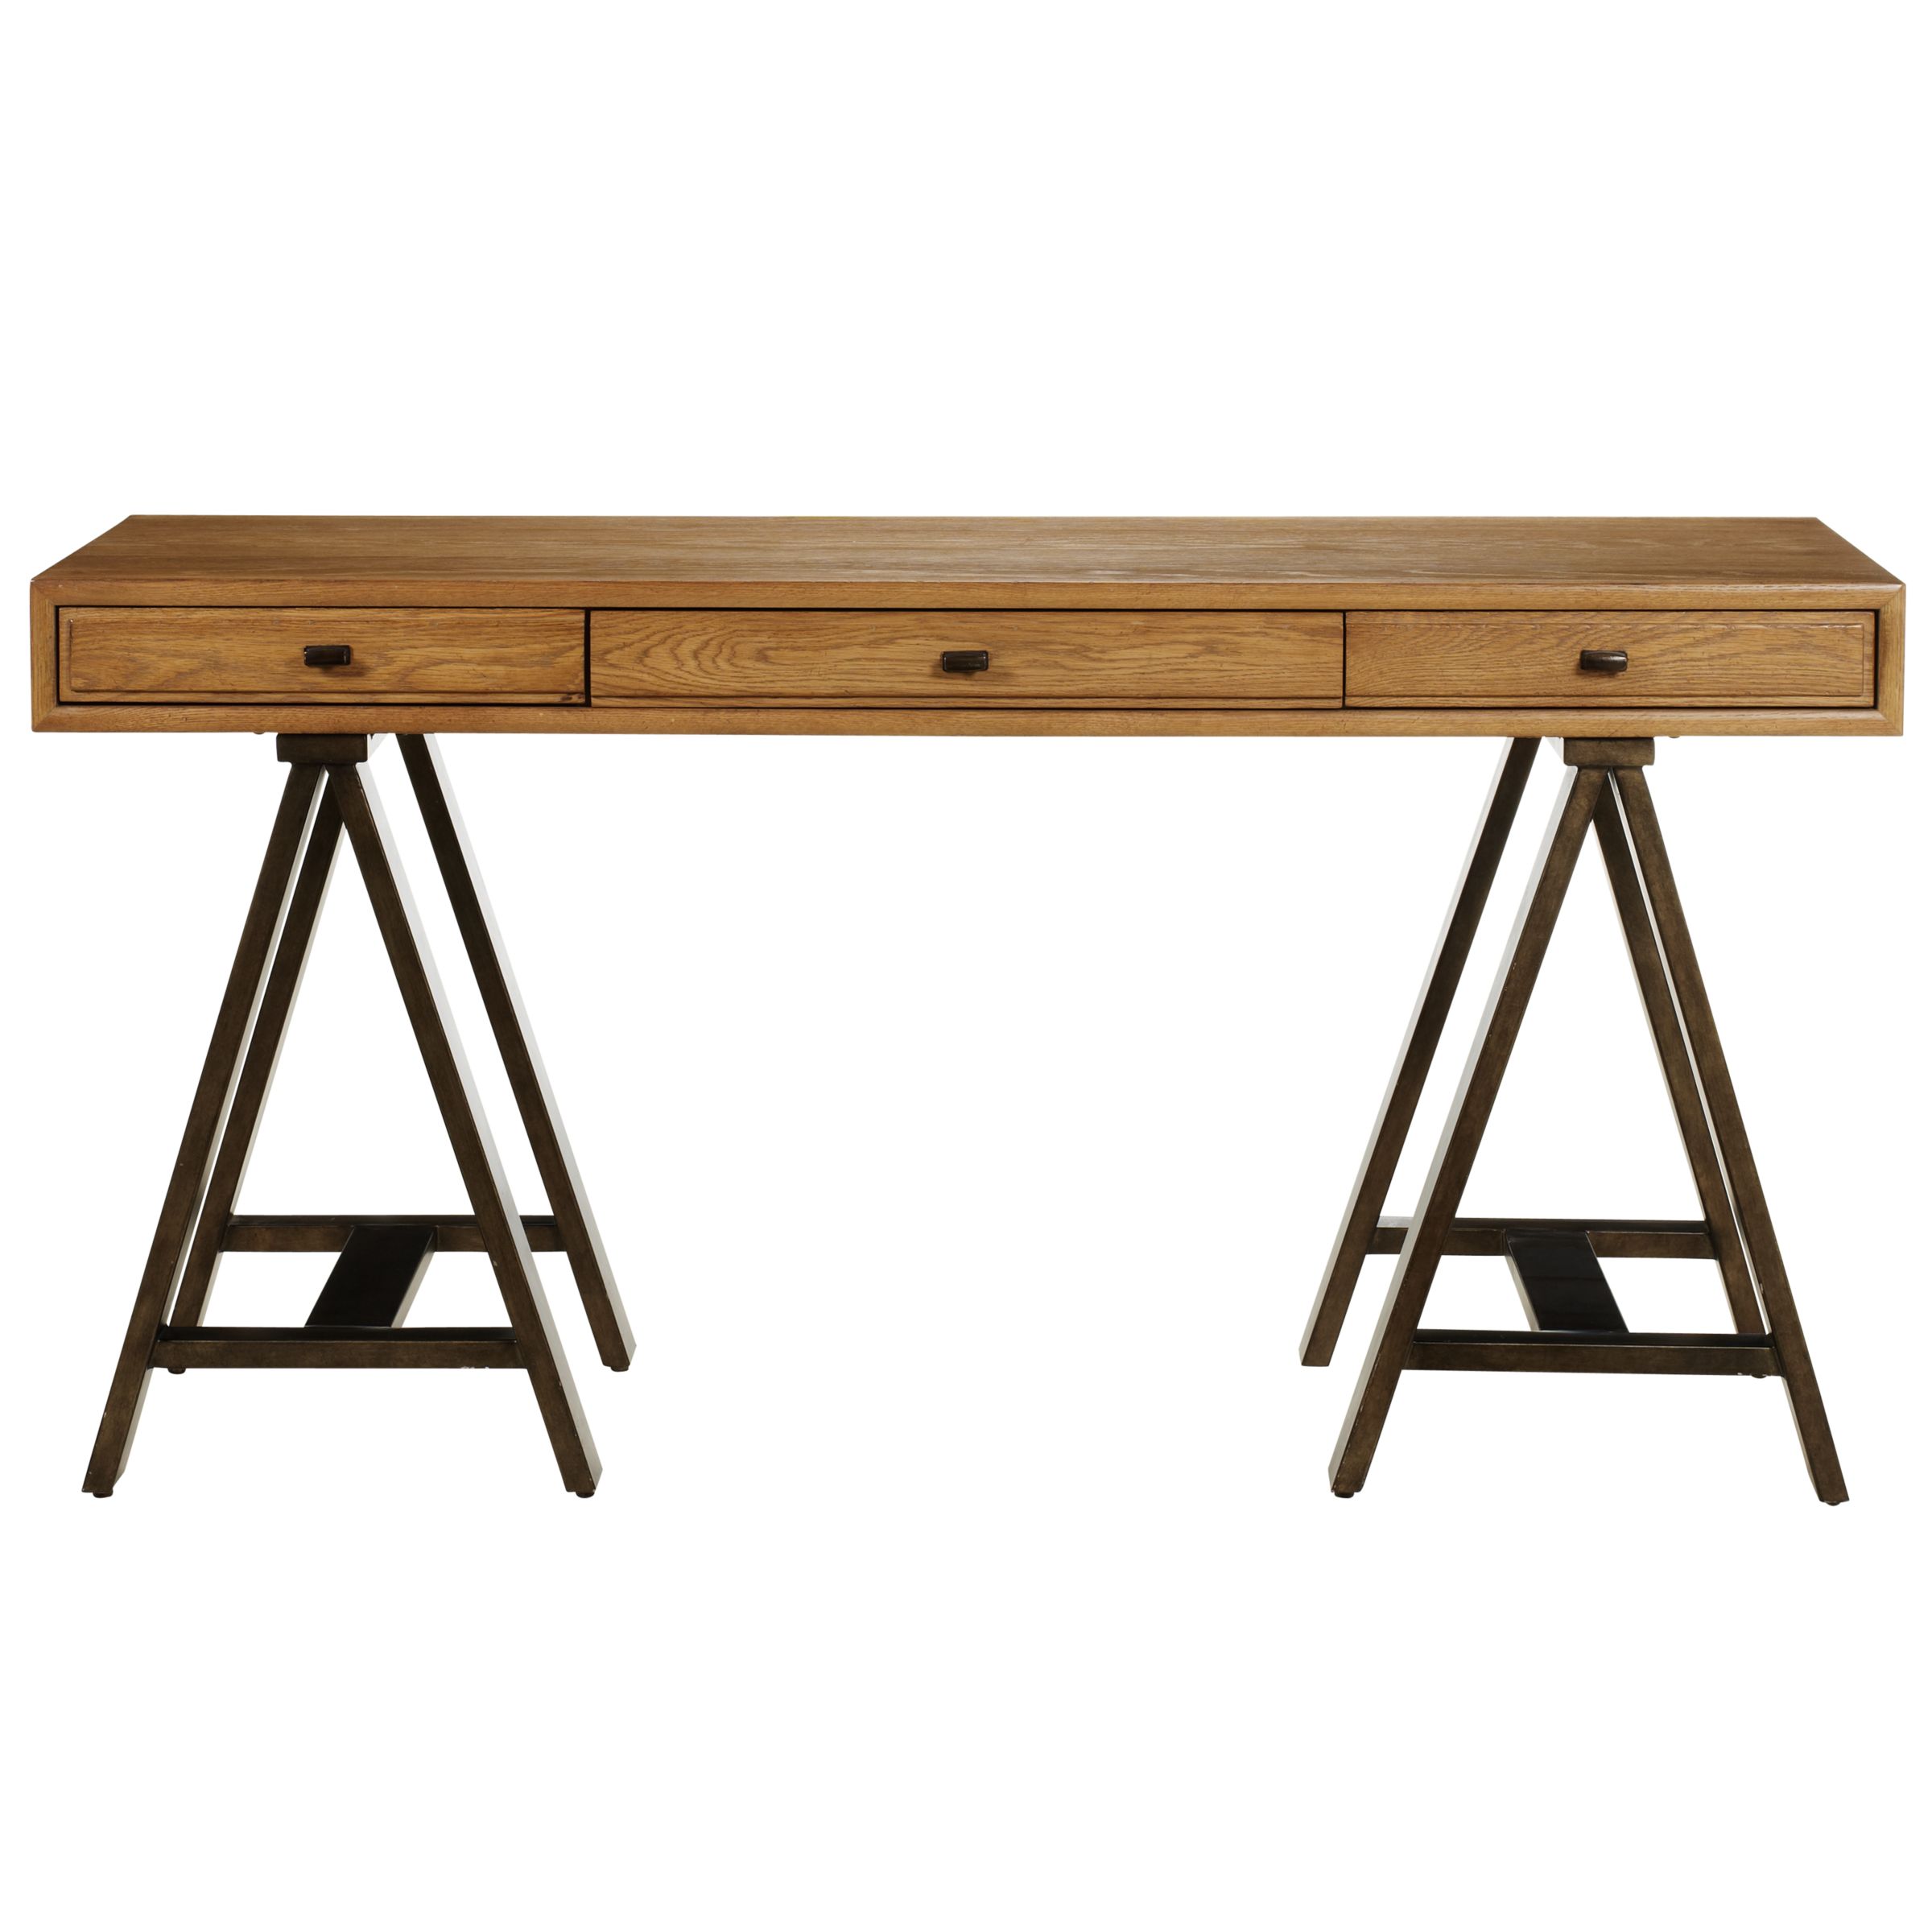 John Lewis Forecast Console Table at John Lewis